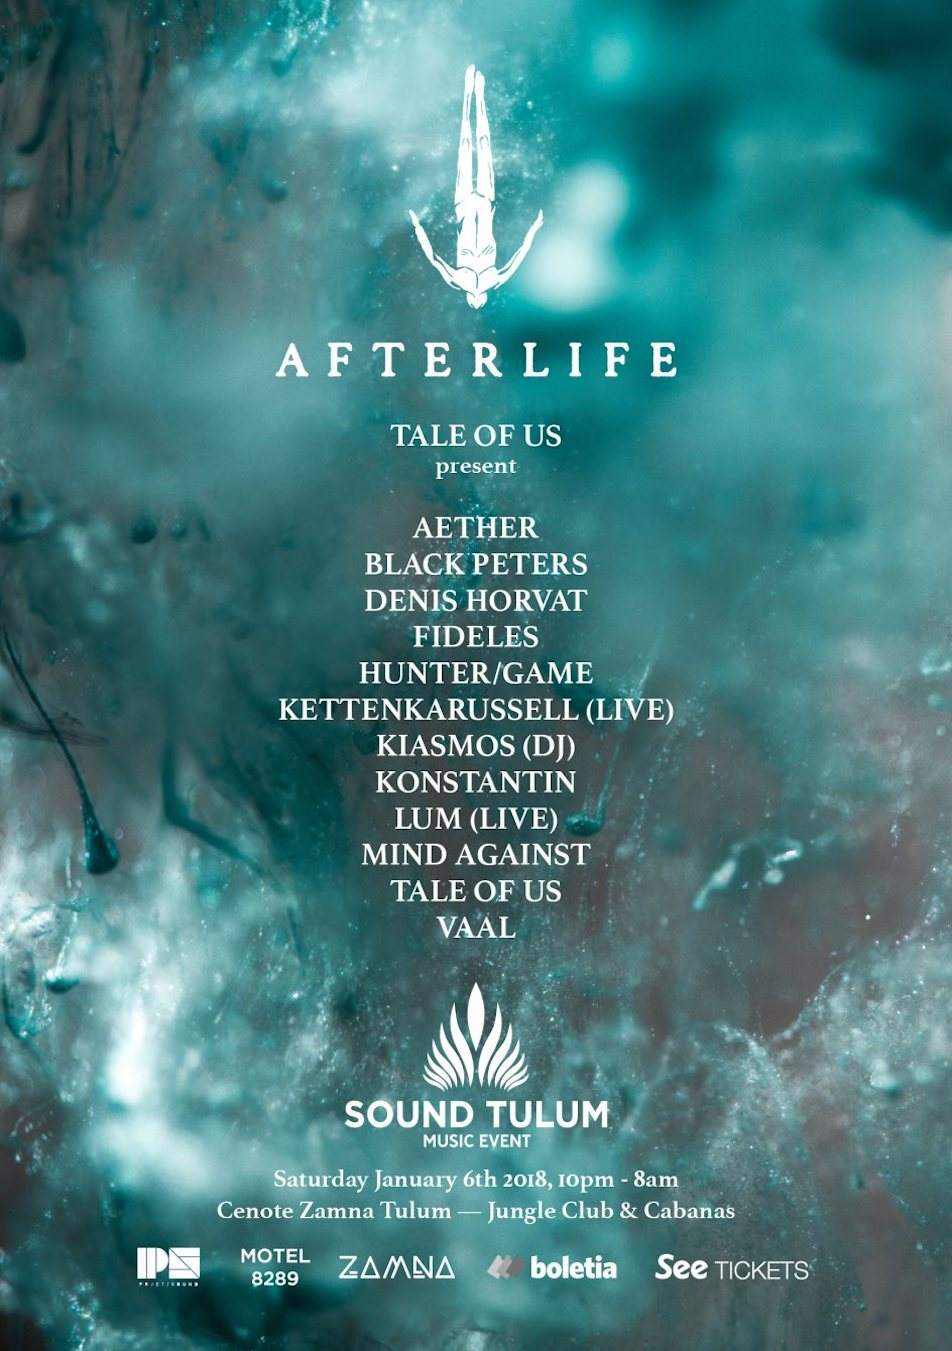 Tale Of Us to host Afterlife party at Mexico's Zamna Tulum image